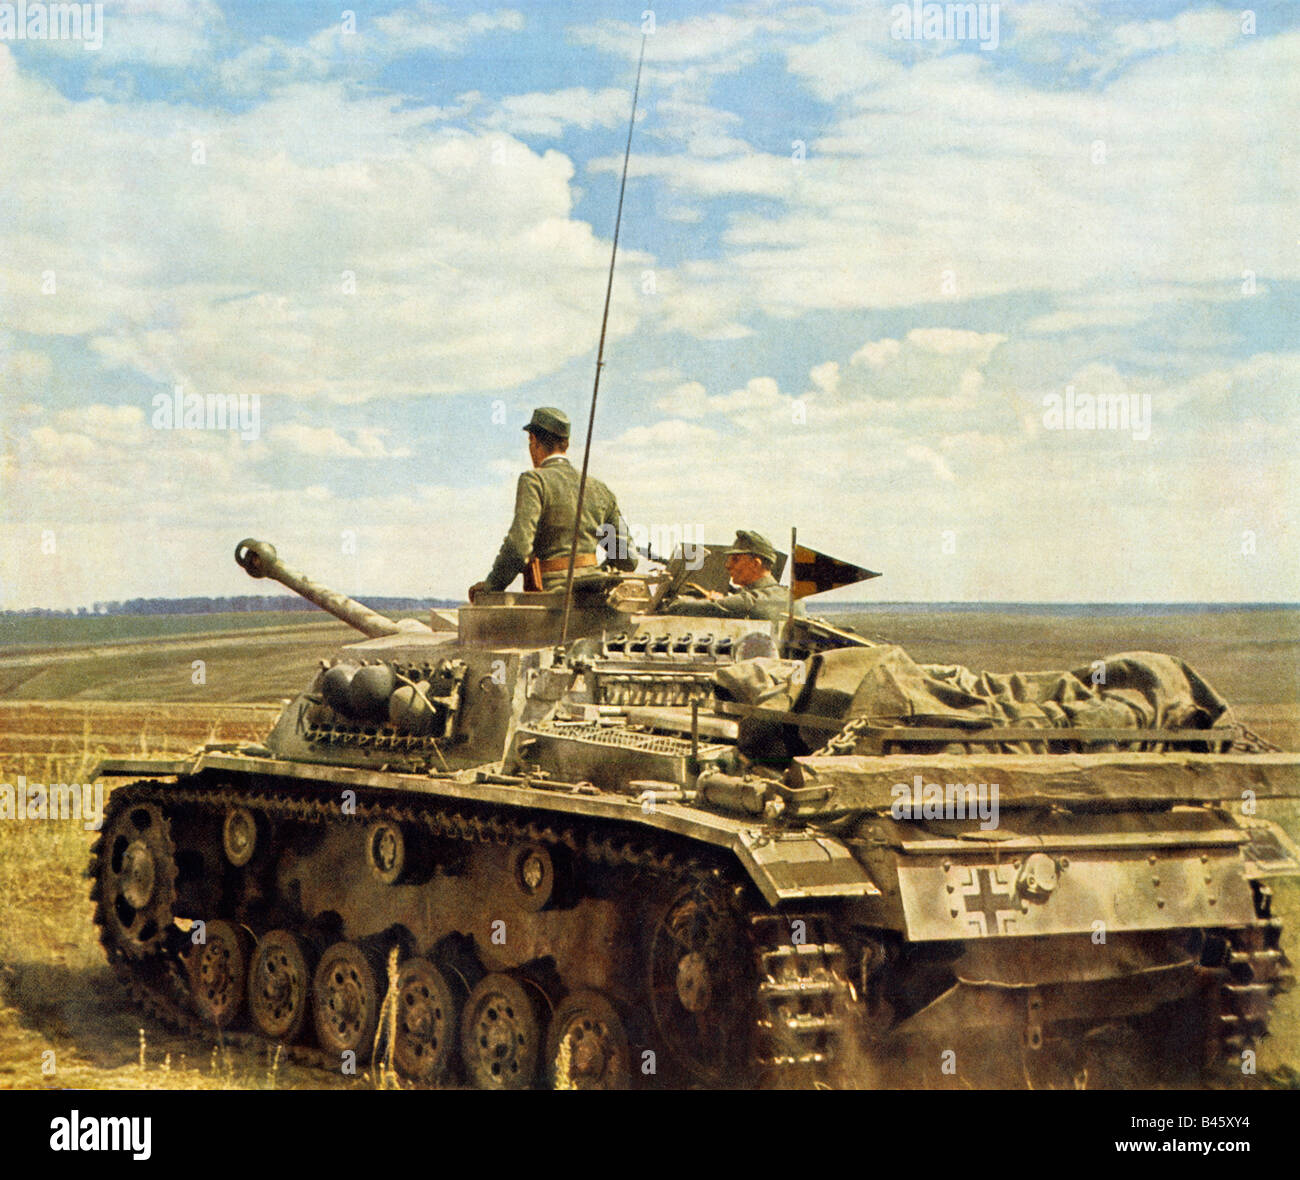 Wehrmacht Panzer Reconnoitres a tank commander looks around on the Eastern Front in WW II early in the Russian campaign Stock Photo